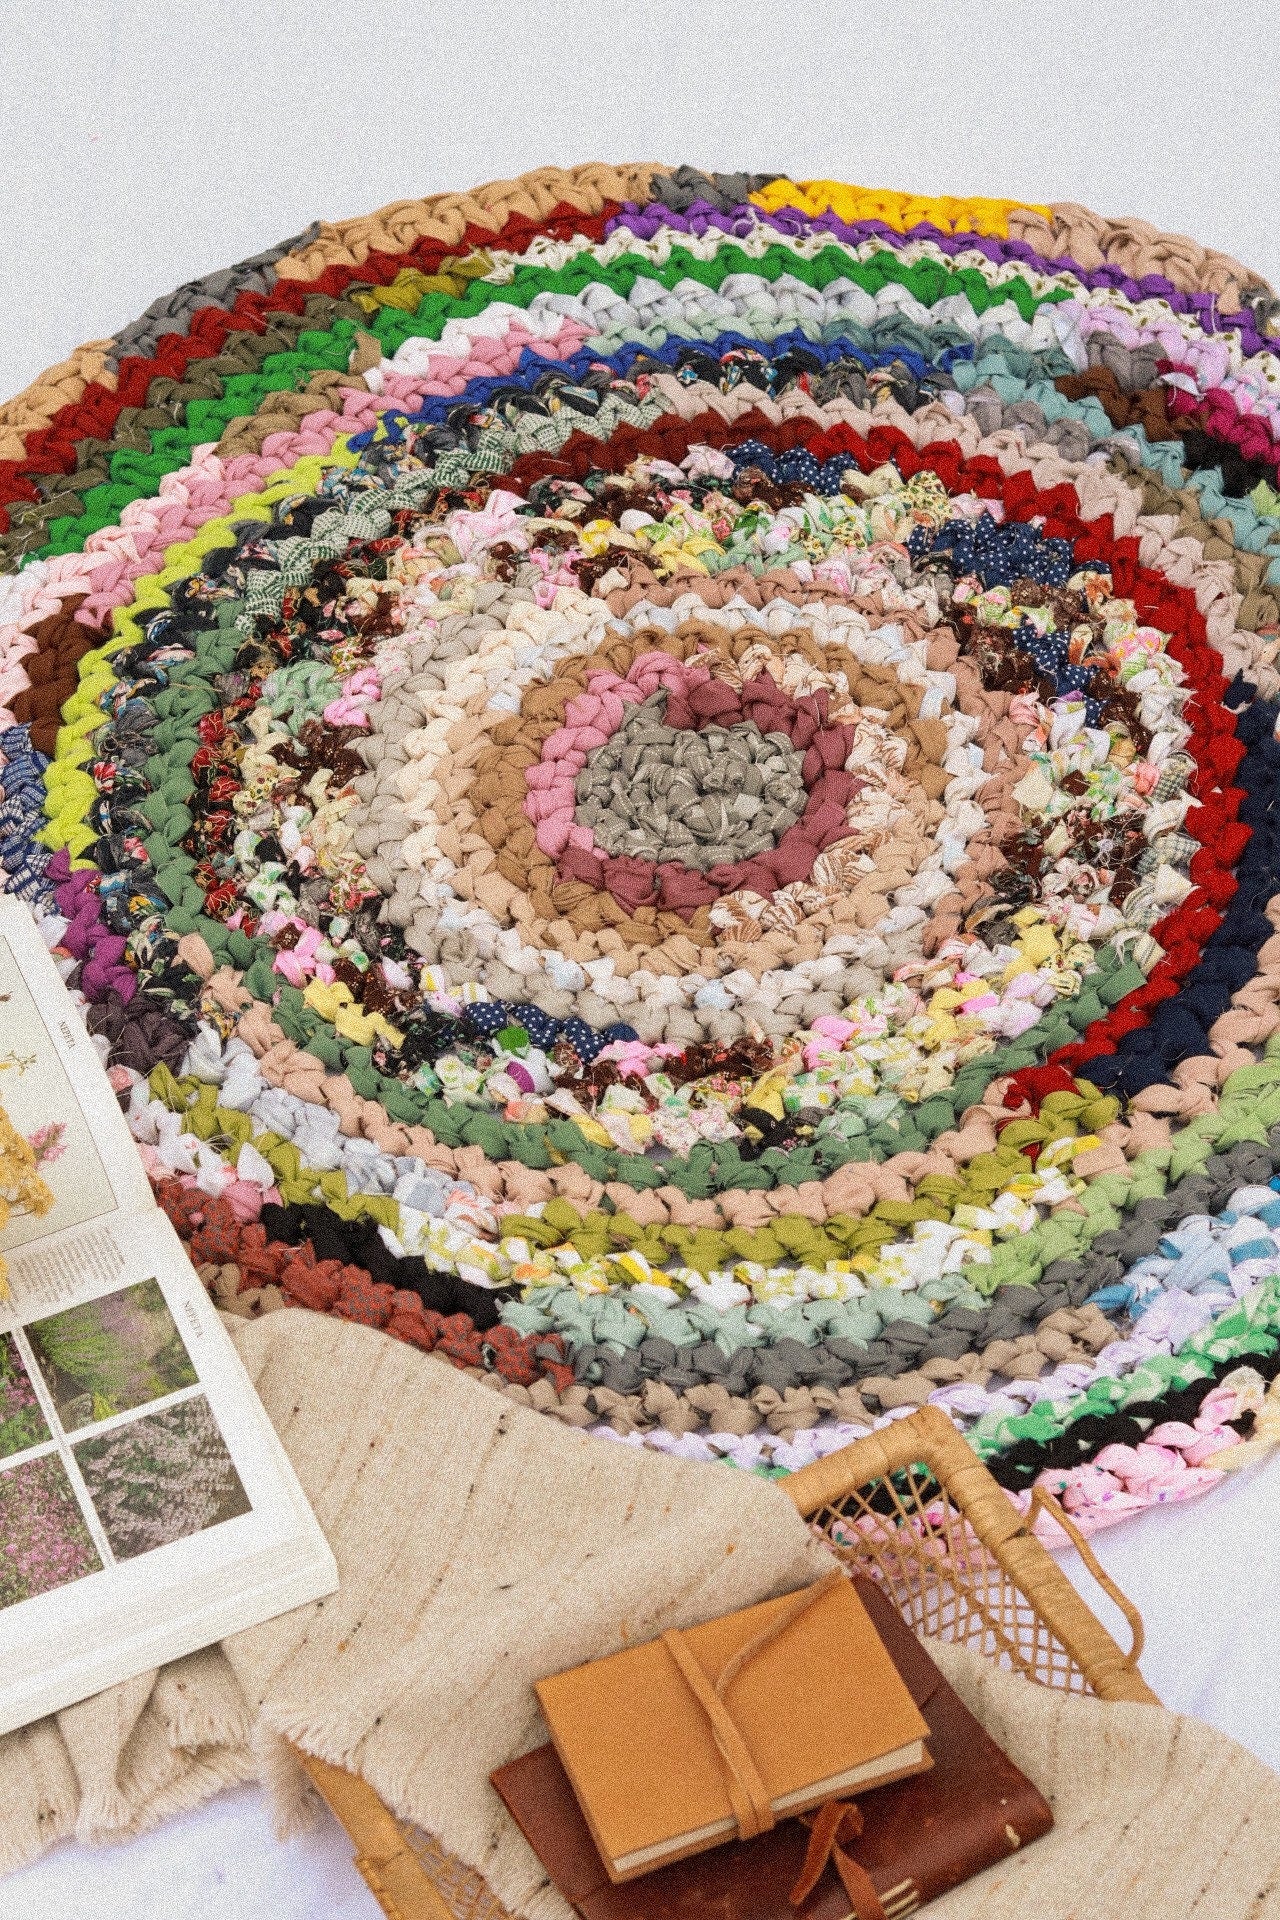 How to Make a Colourful Crochet Rag Rug With Recycled Fabrics